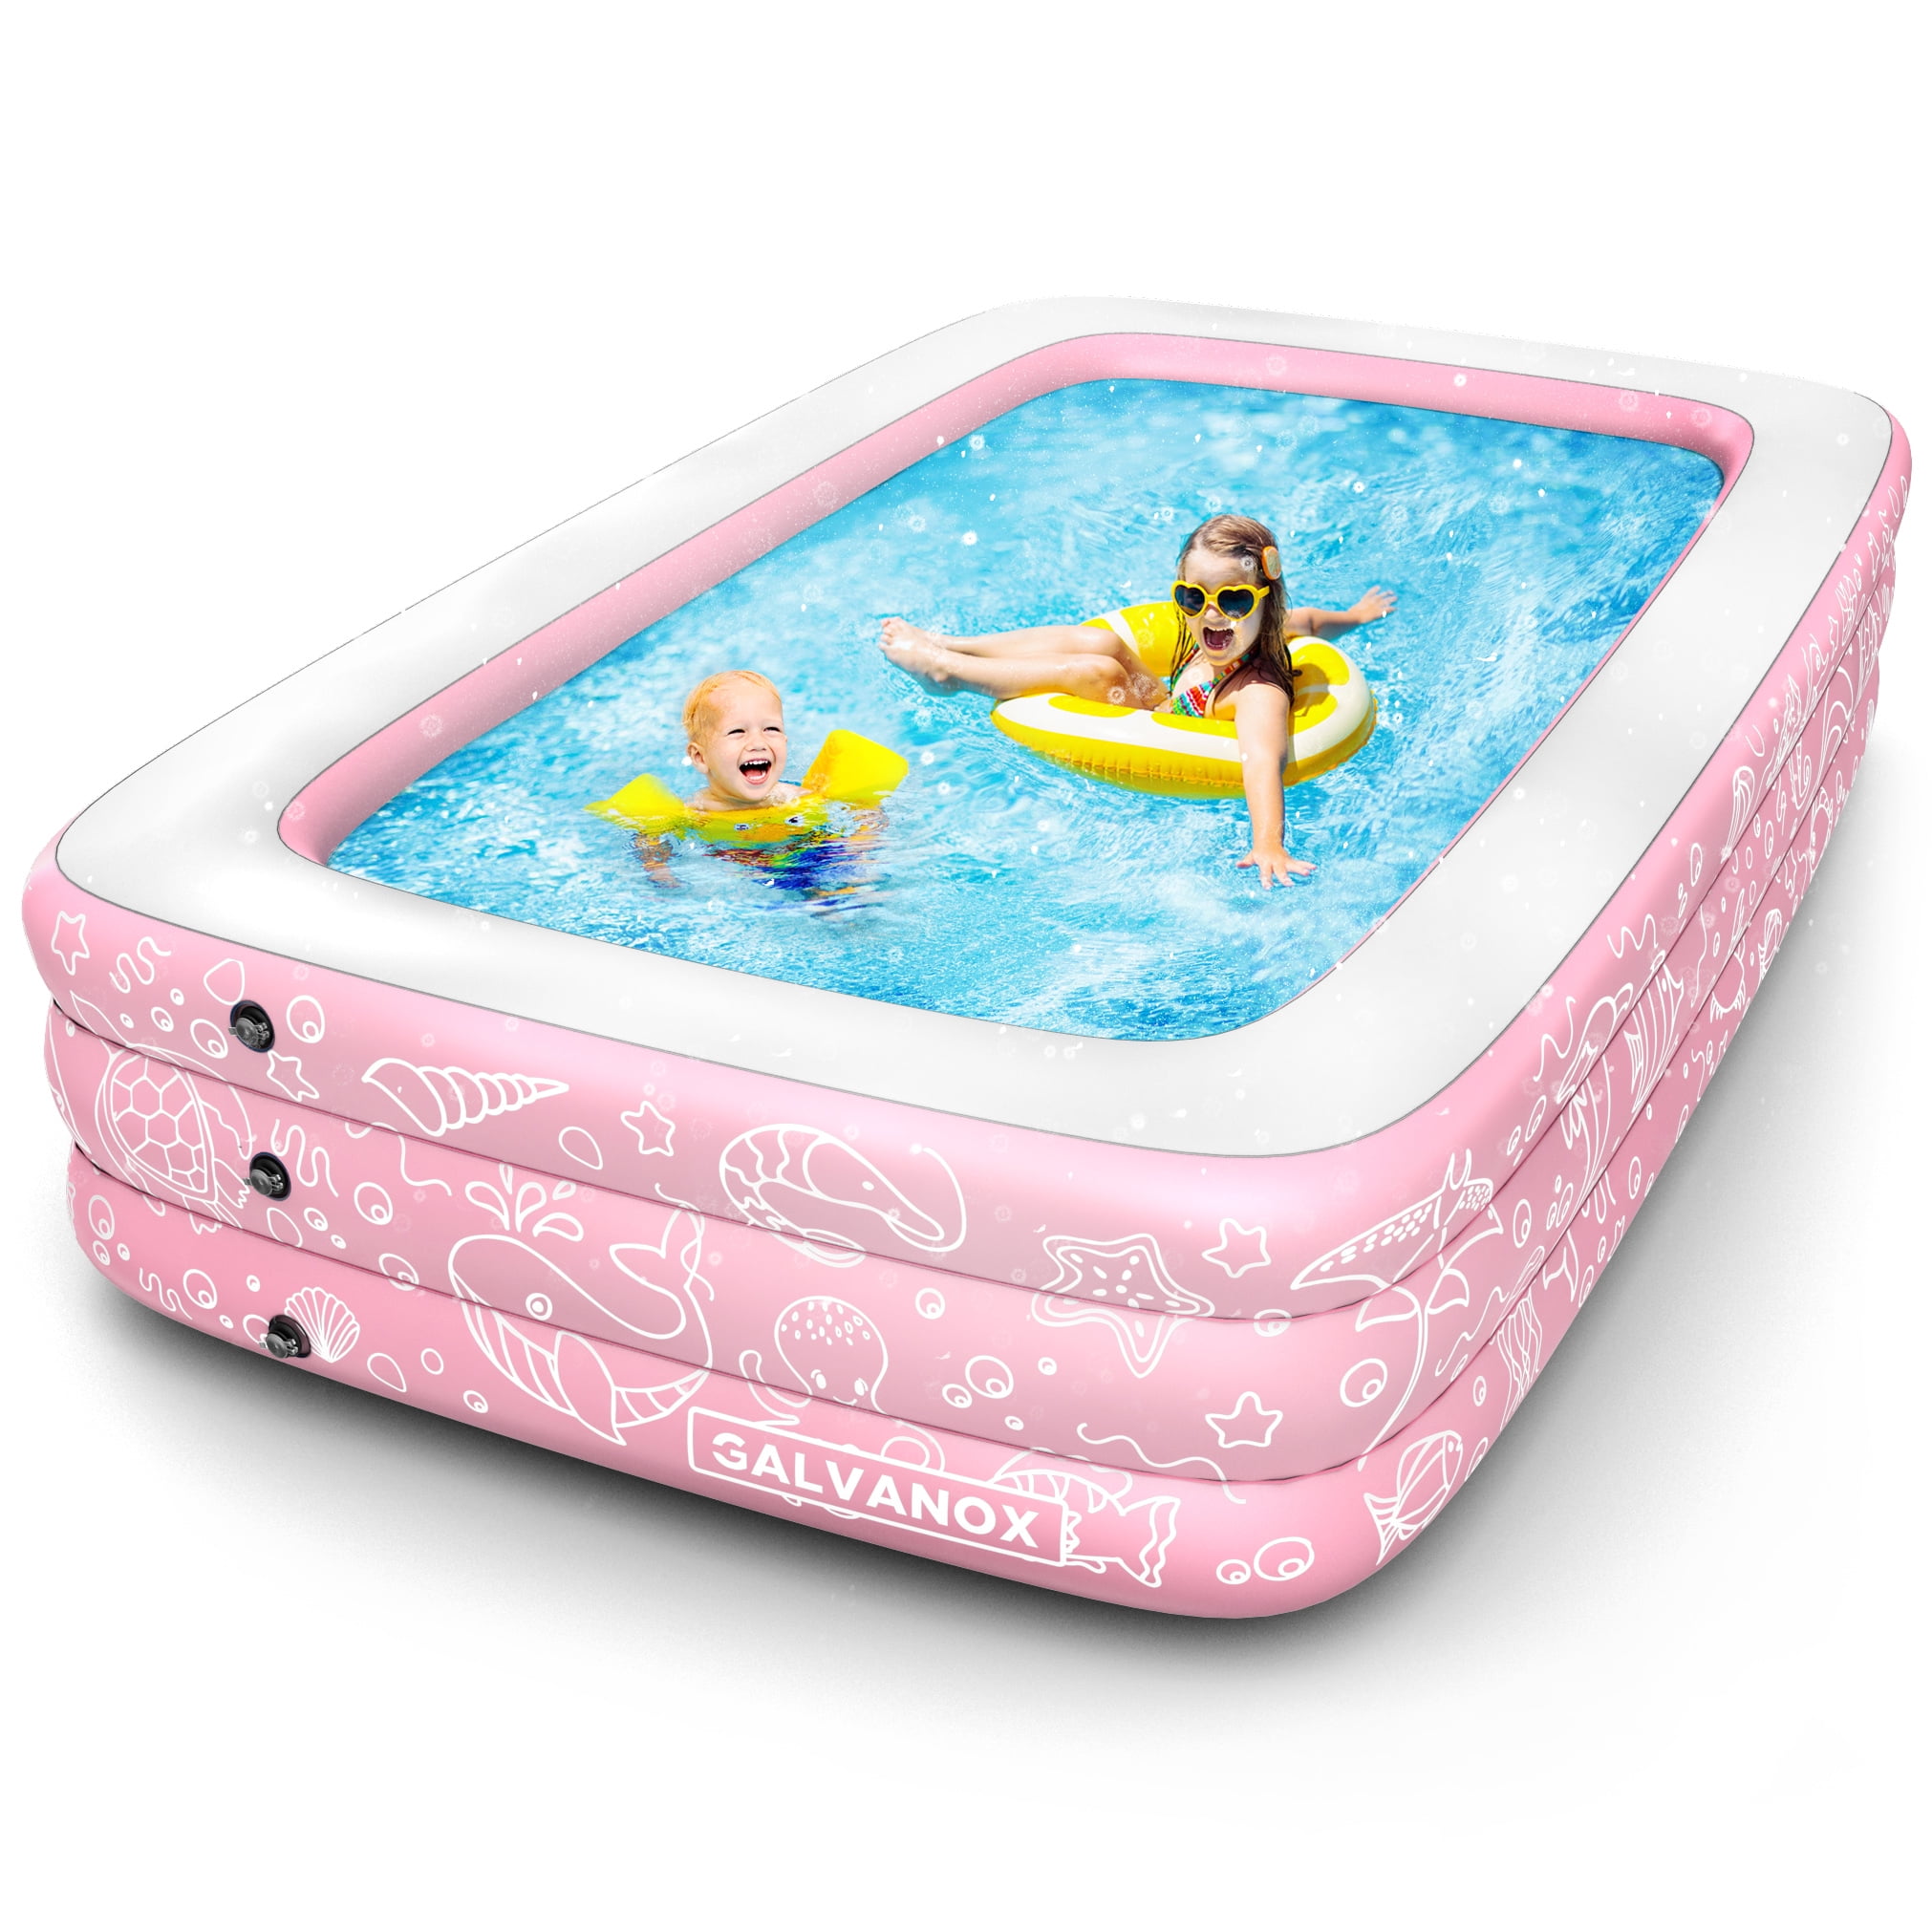 Inflatable Pool, Above Ground Swimming Pool for Kiddie